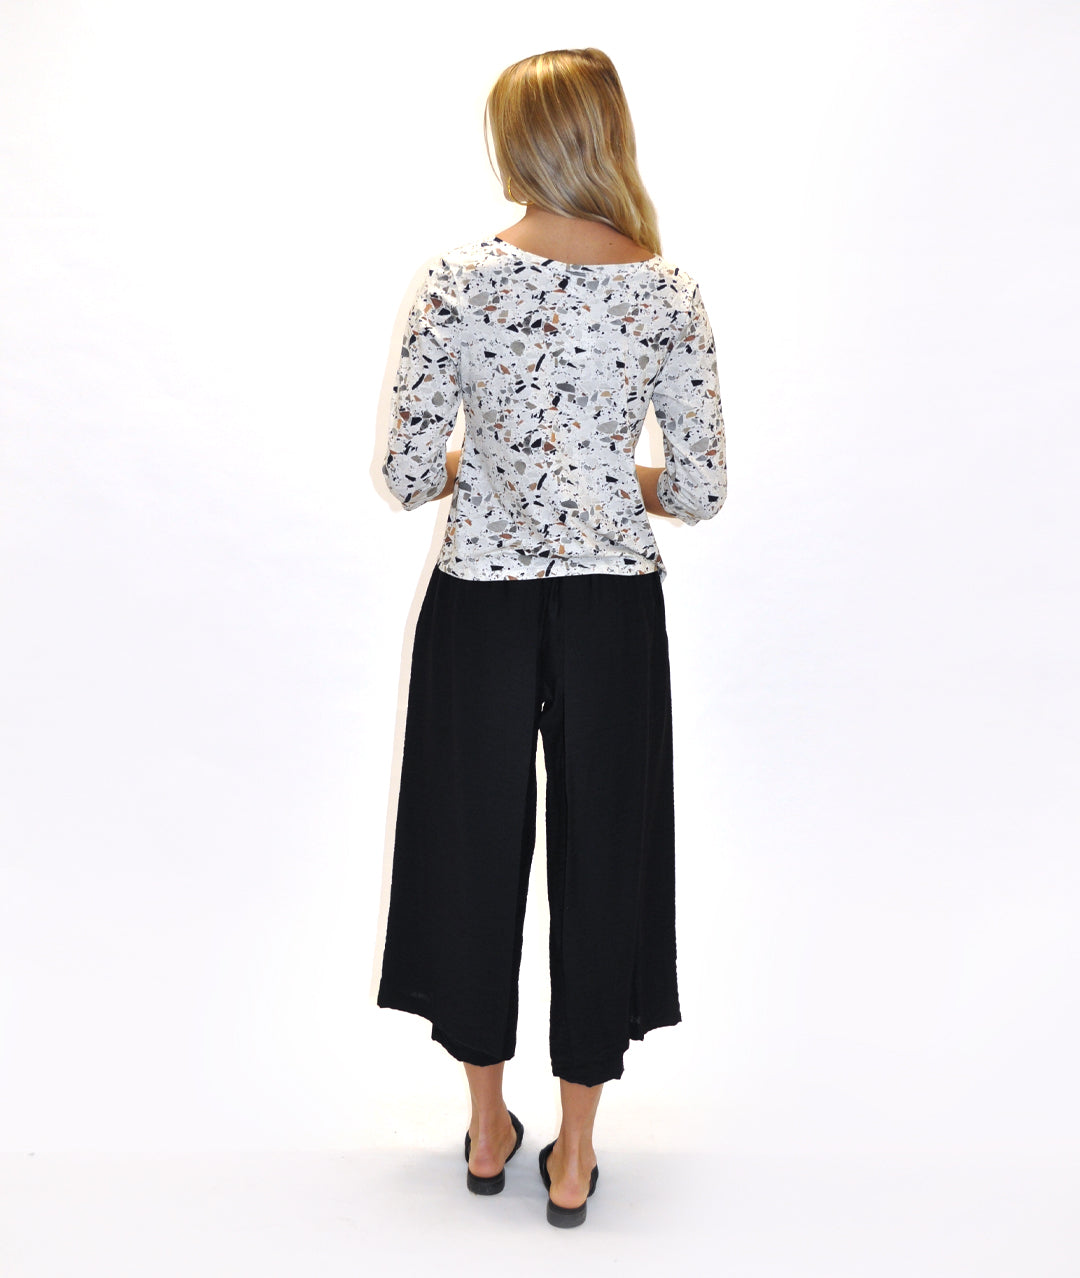 model in a black pant with a draped panel on either side, worn with a fitting terrazzo print top